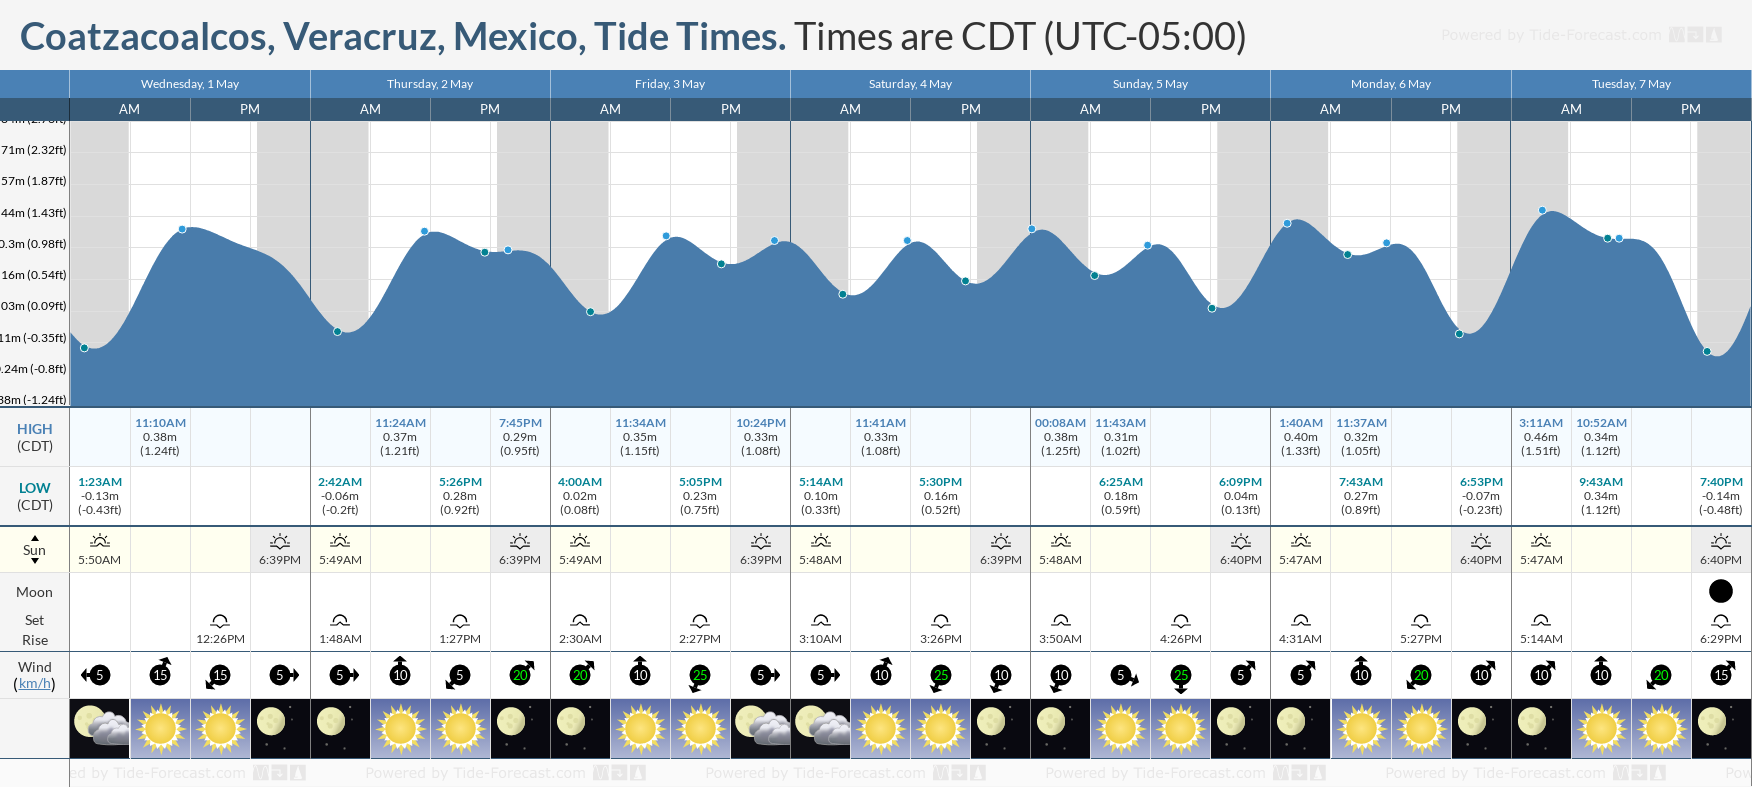 Coatzacoalcos, Veracruz, Mexico Tide Chart including high and low tide times for the next 7 days